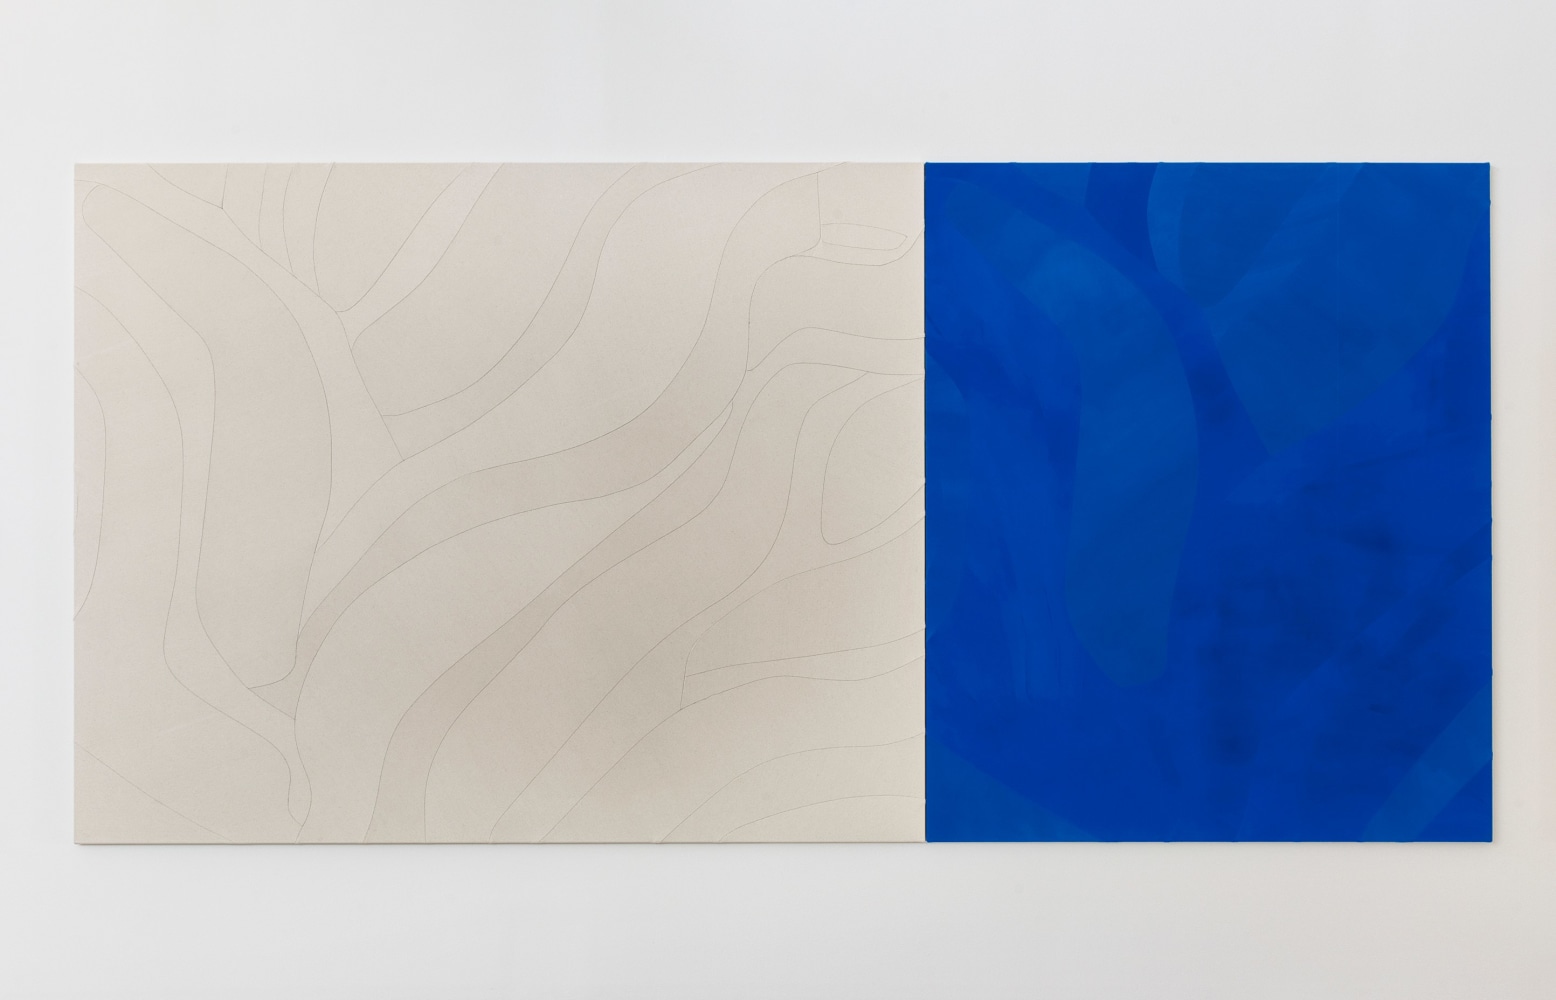 Sarah Crowner
Untitled (Around Orange), 2023
Acrylic on canvas, sewn
72 x 150 inches
(182.9 x 381 cm)
(Two panels)